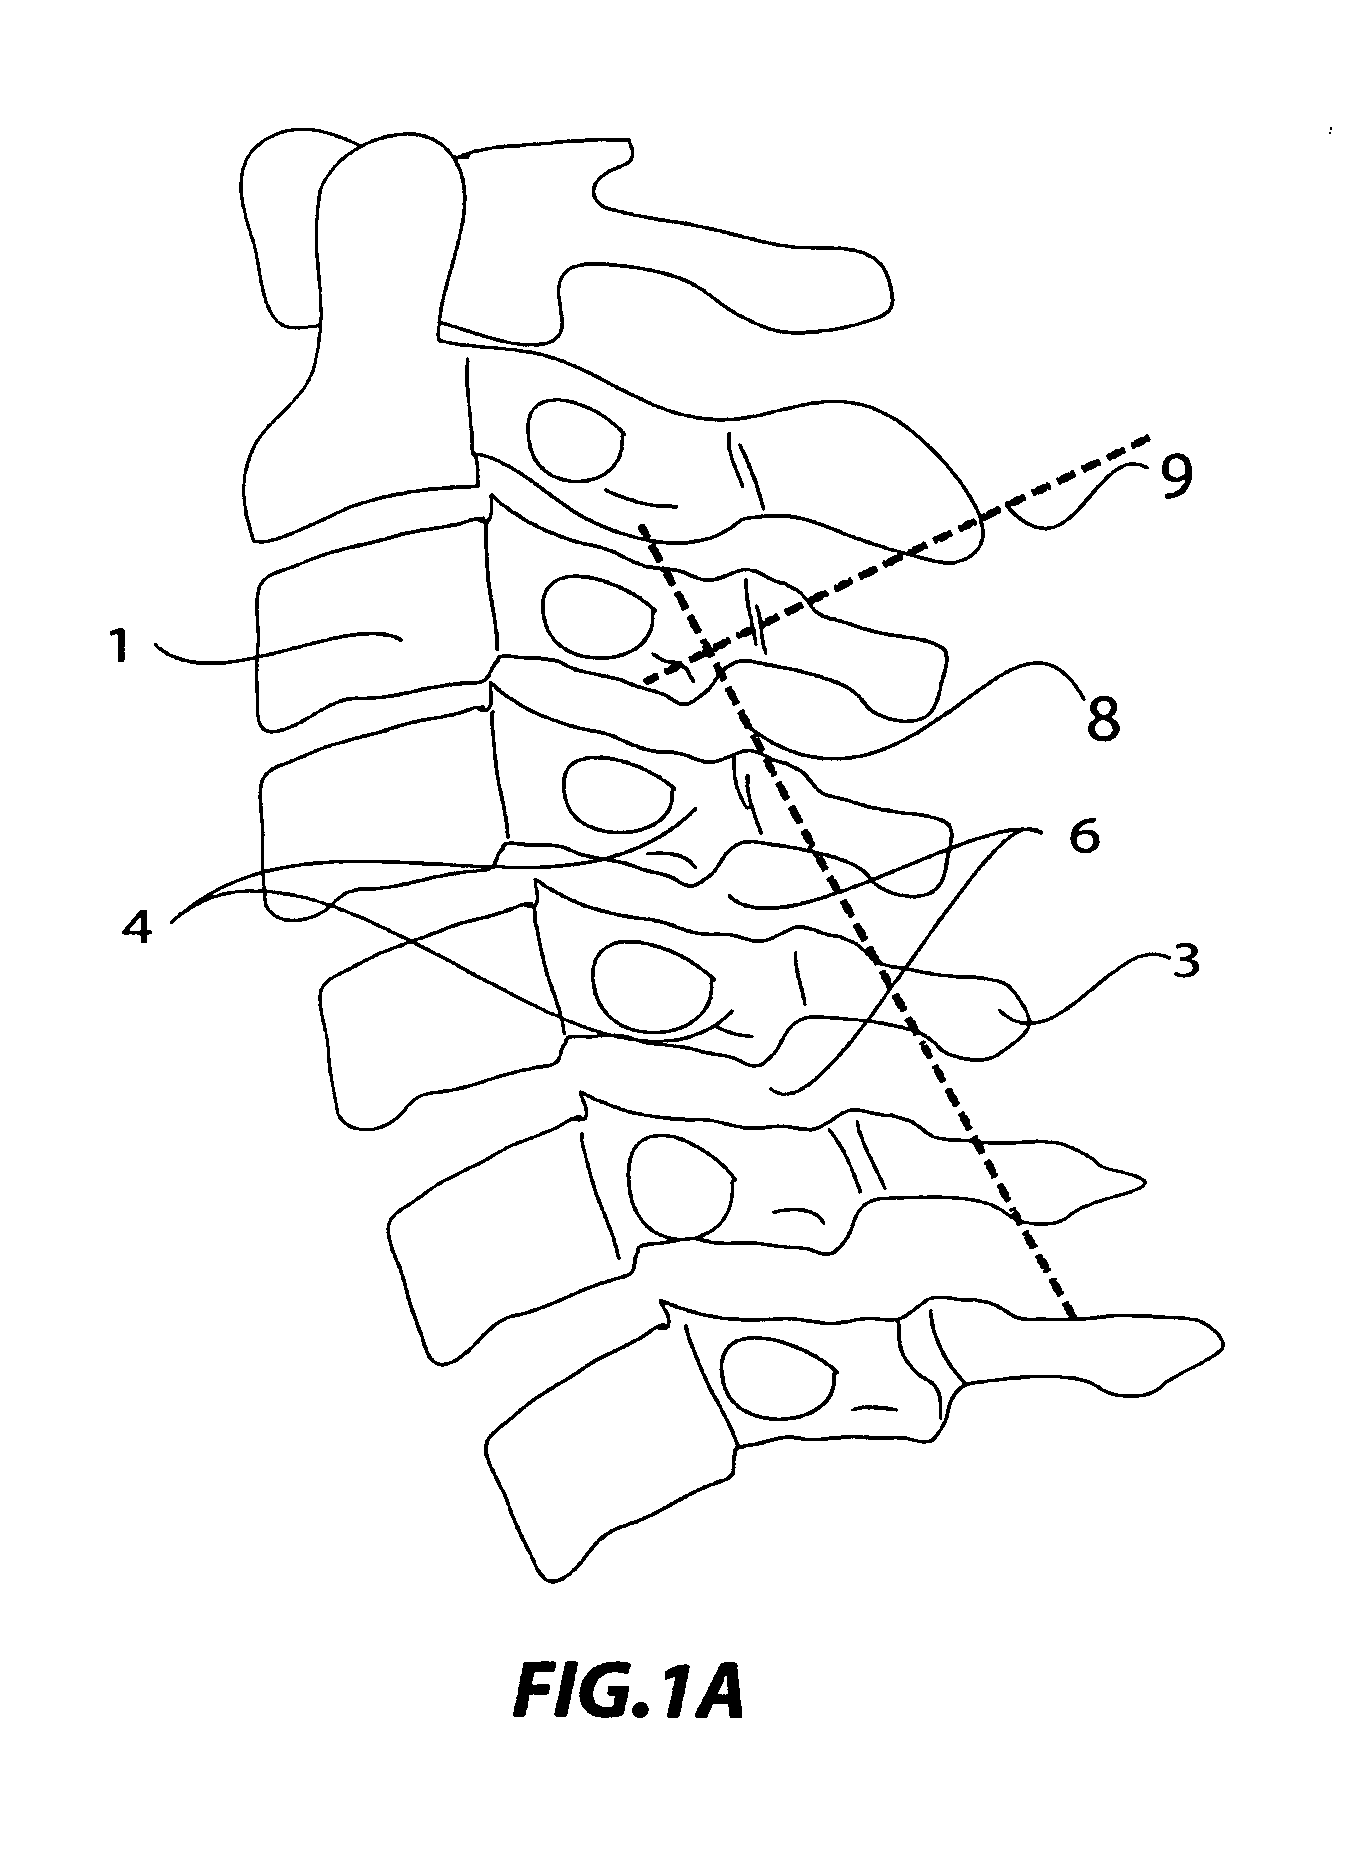 Technique and device for laminar osteotomy and laminoplasty